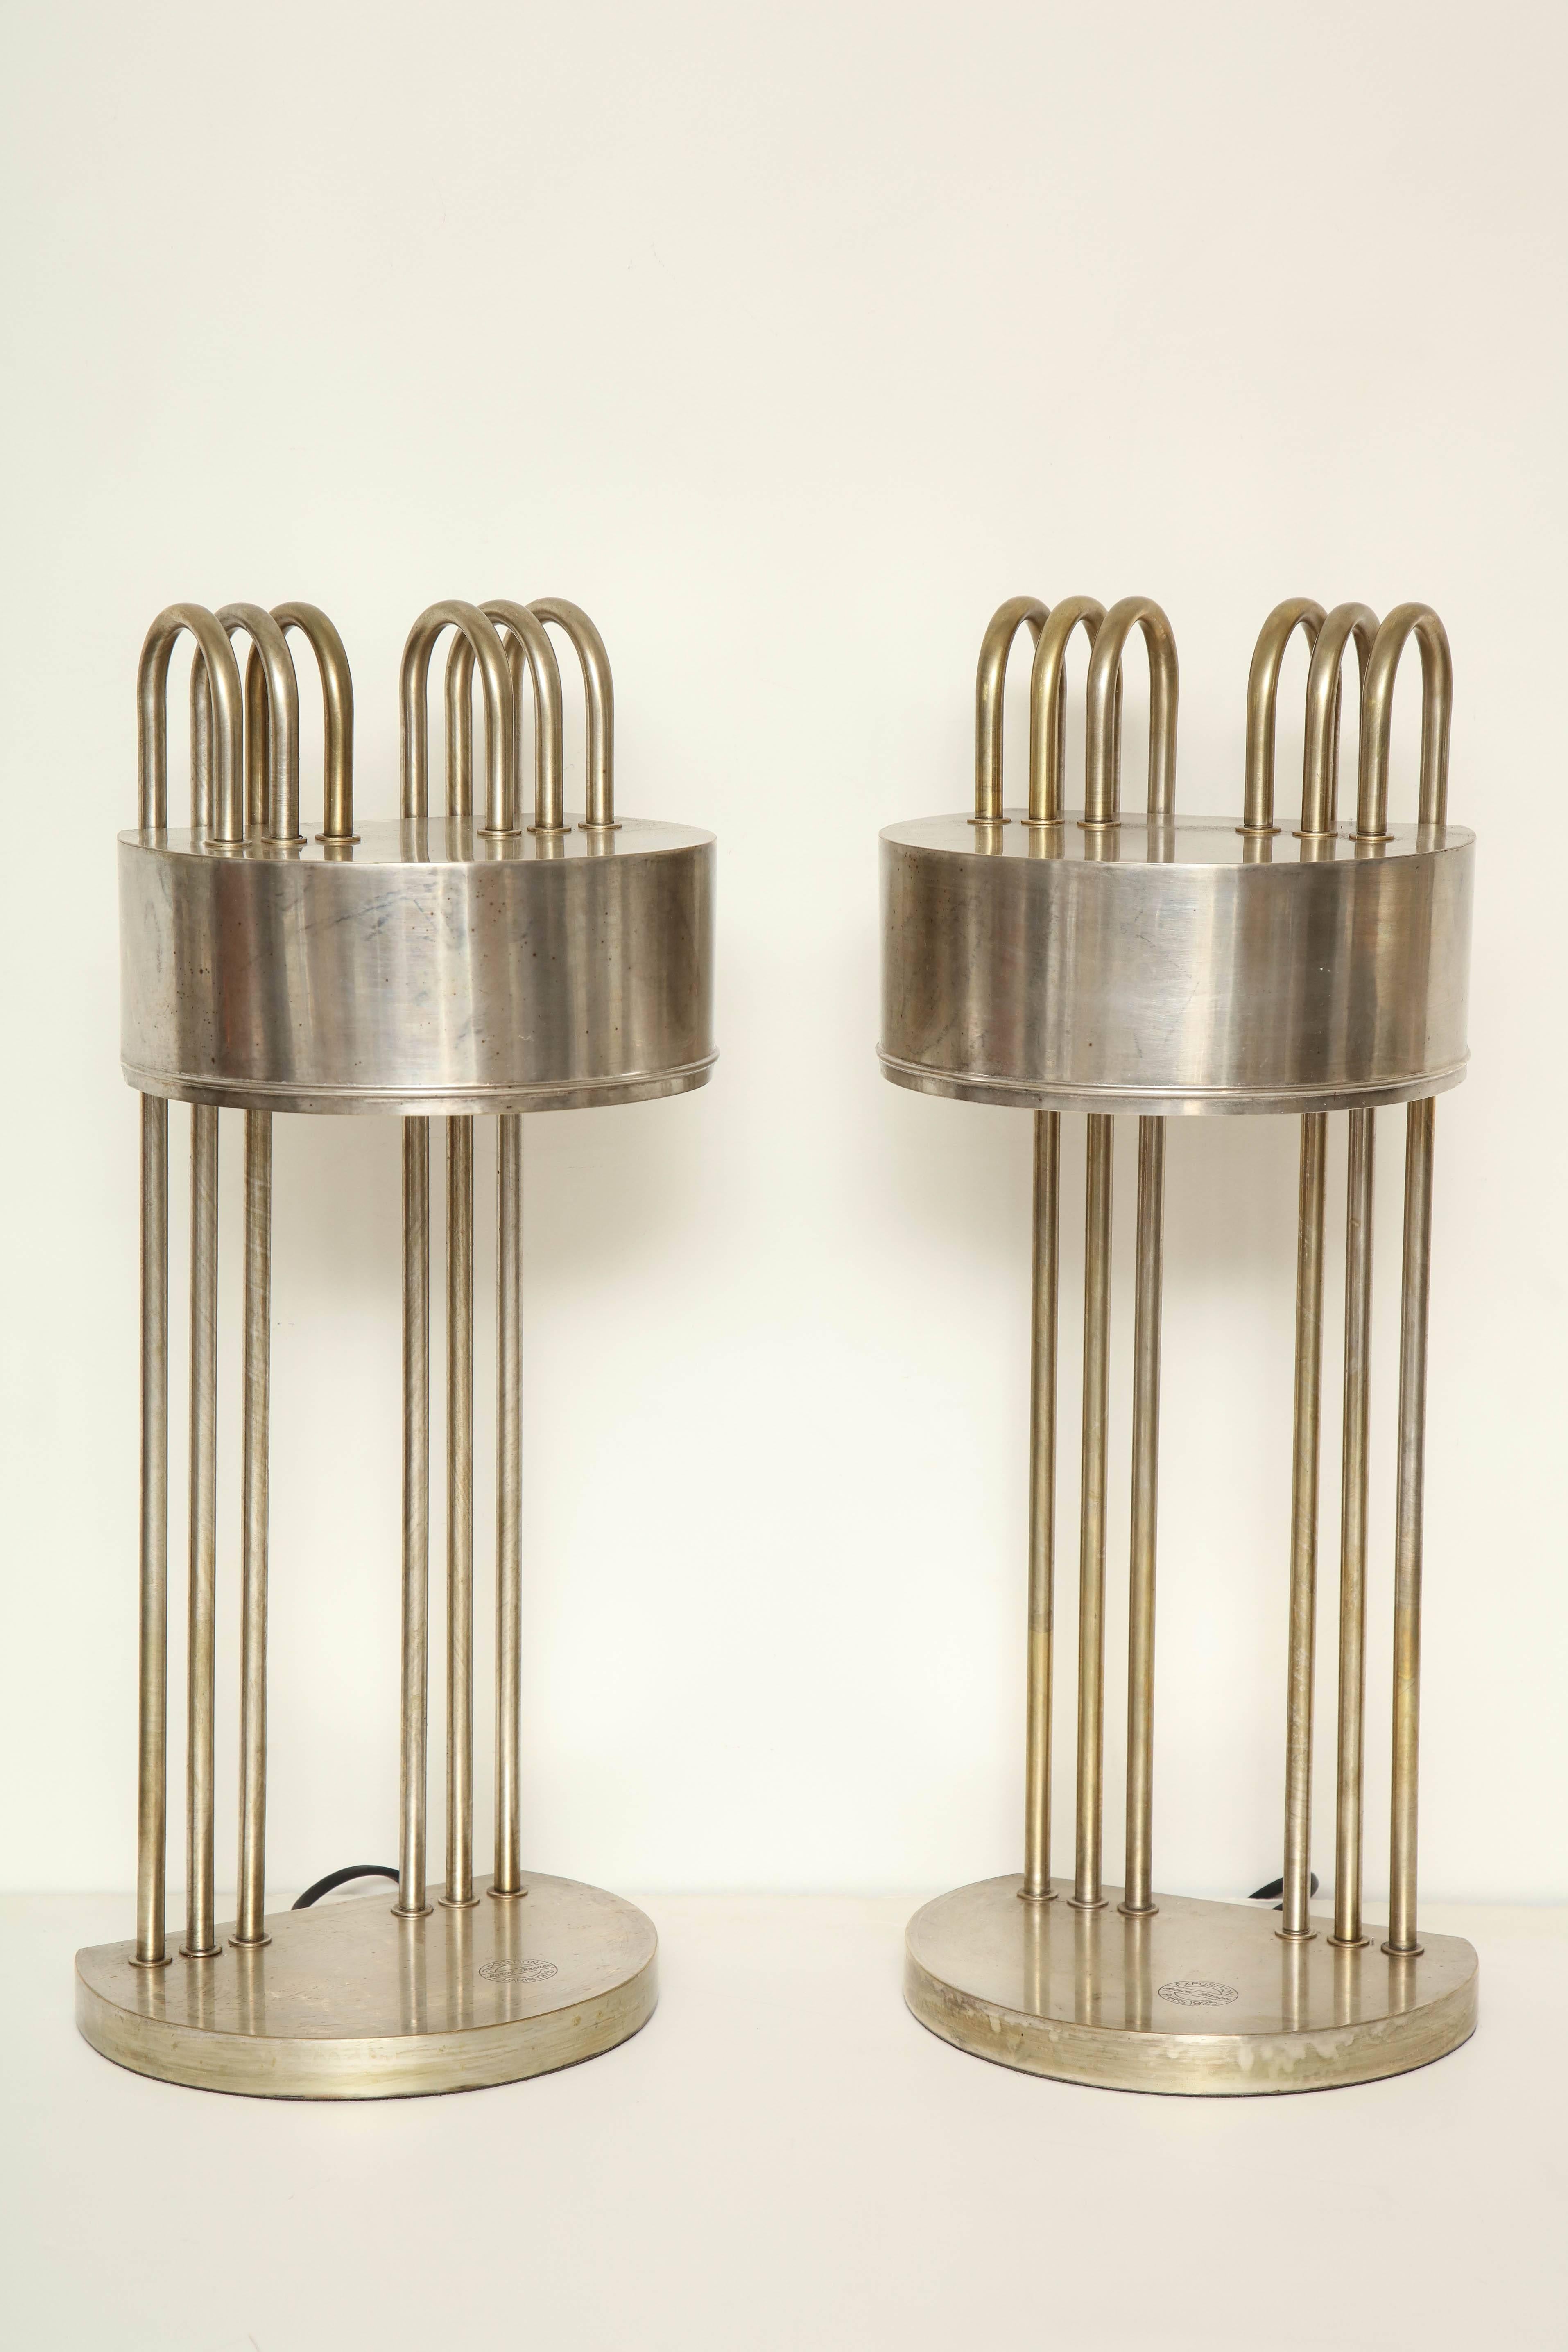 Pair of nickel-plated brass table lamps by Marcel Breuer from the Paris Exhibition, 1925. Stamp marked on base and also marked on bottom. Recently rewired for US specifications.


Available to see in our NYC Showroom 
BK Antiques
306 East 61st St.